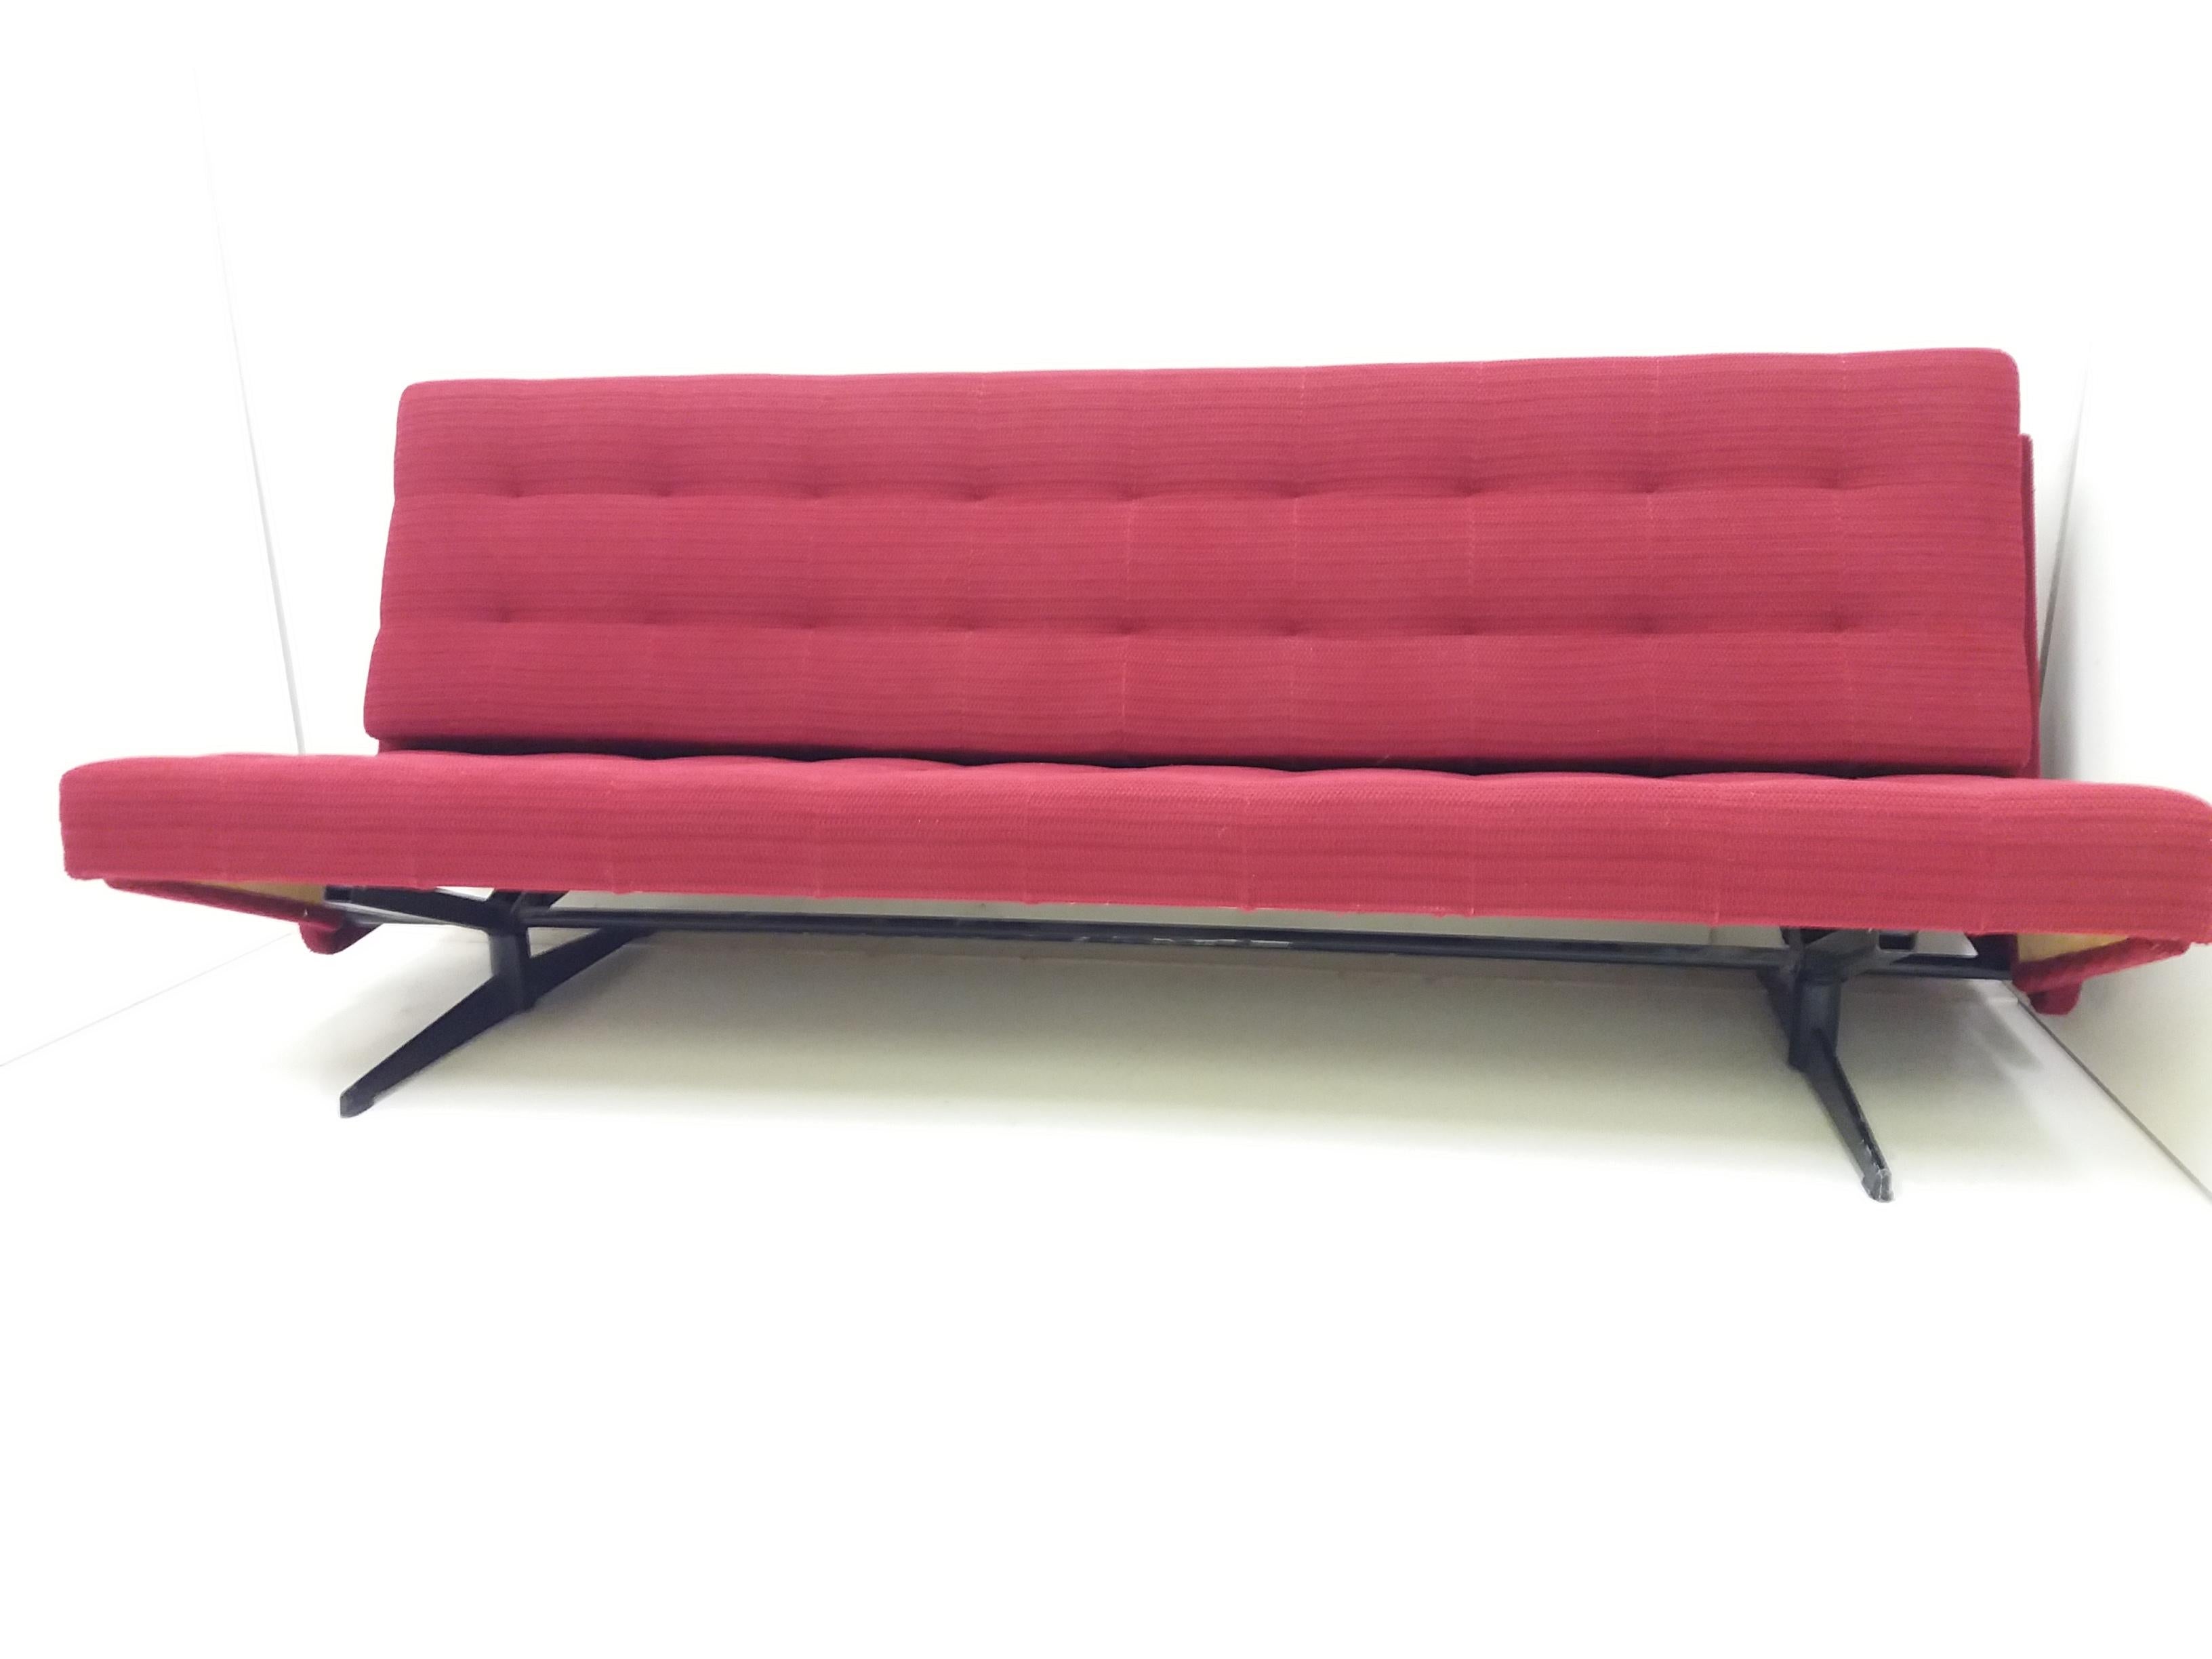 Czech Mid-Century Adjustable Red Sofa, 1968 For Sale